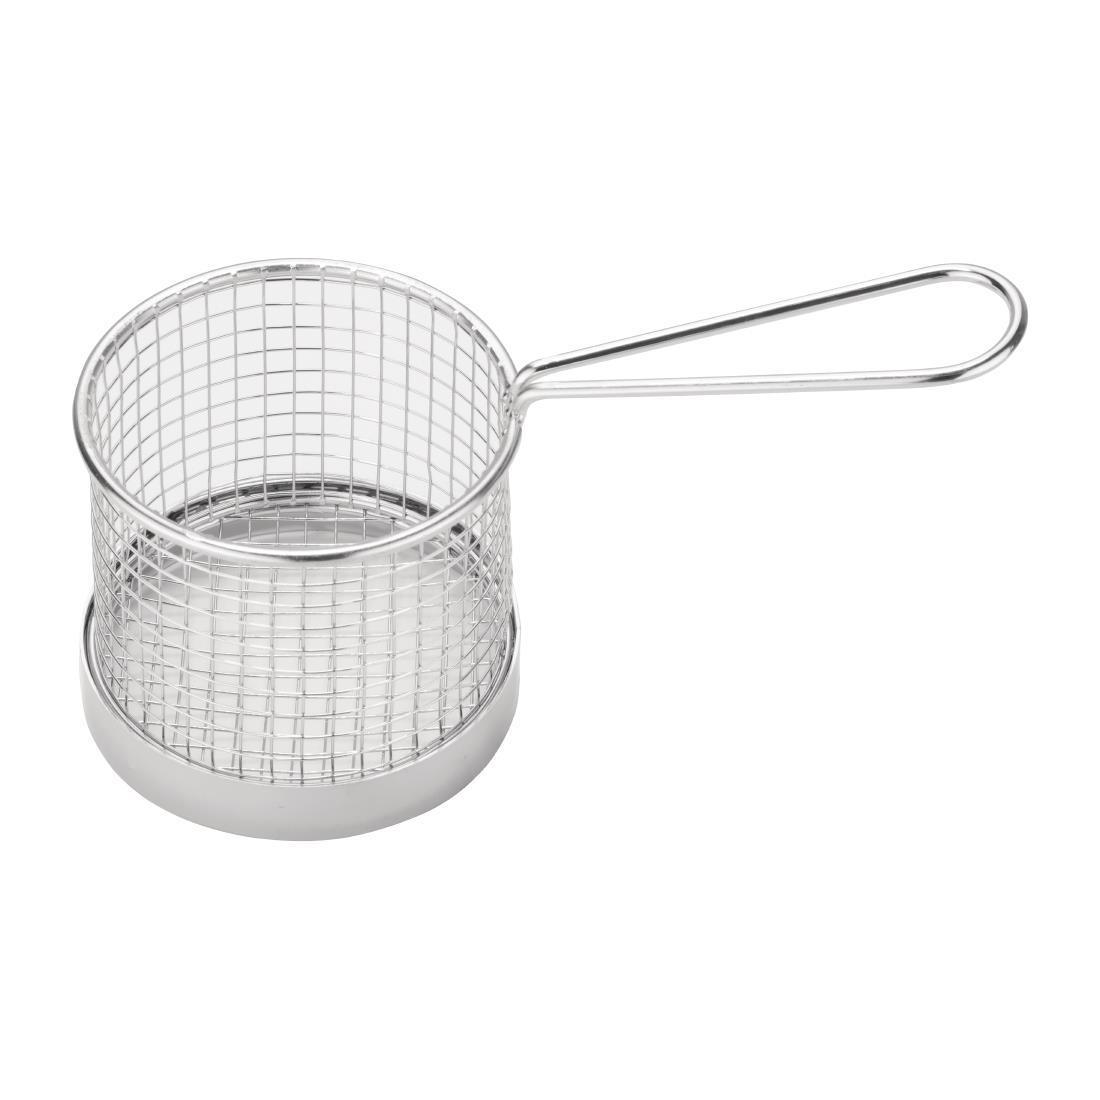 Olympia Chip Basket round with Handle 95mm - GG875  - 4